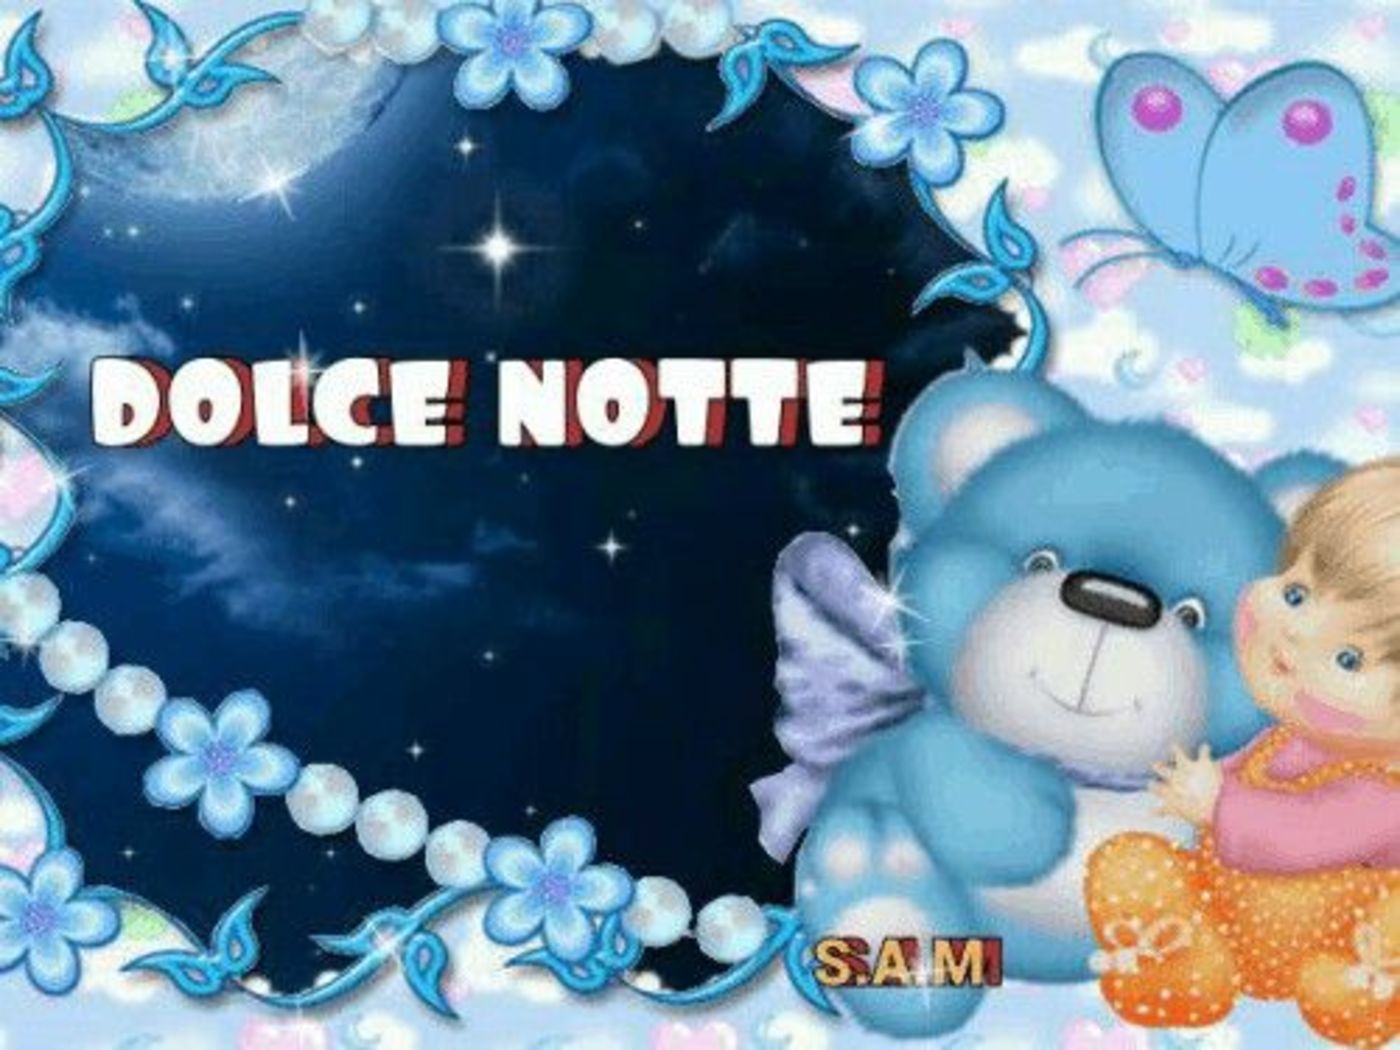 Dolce notte. Логотип Dolce_notte. Dolce notte картинки.